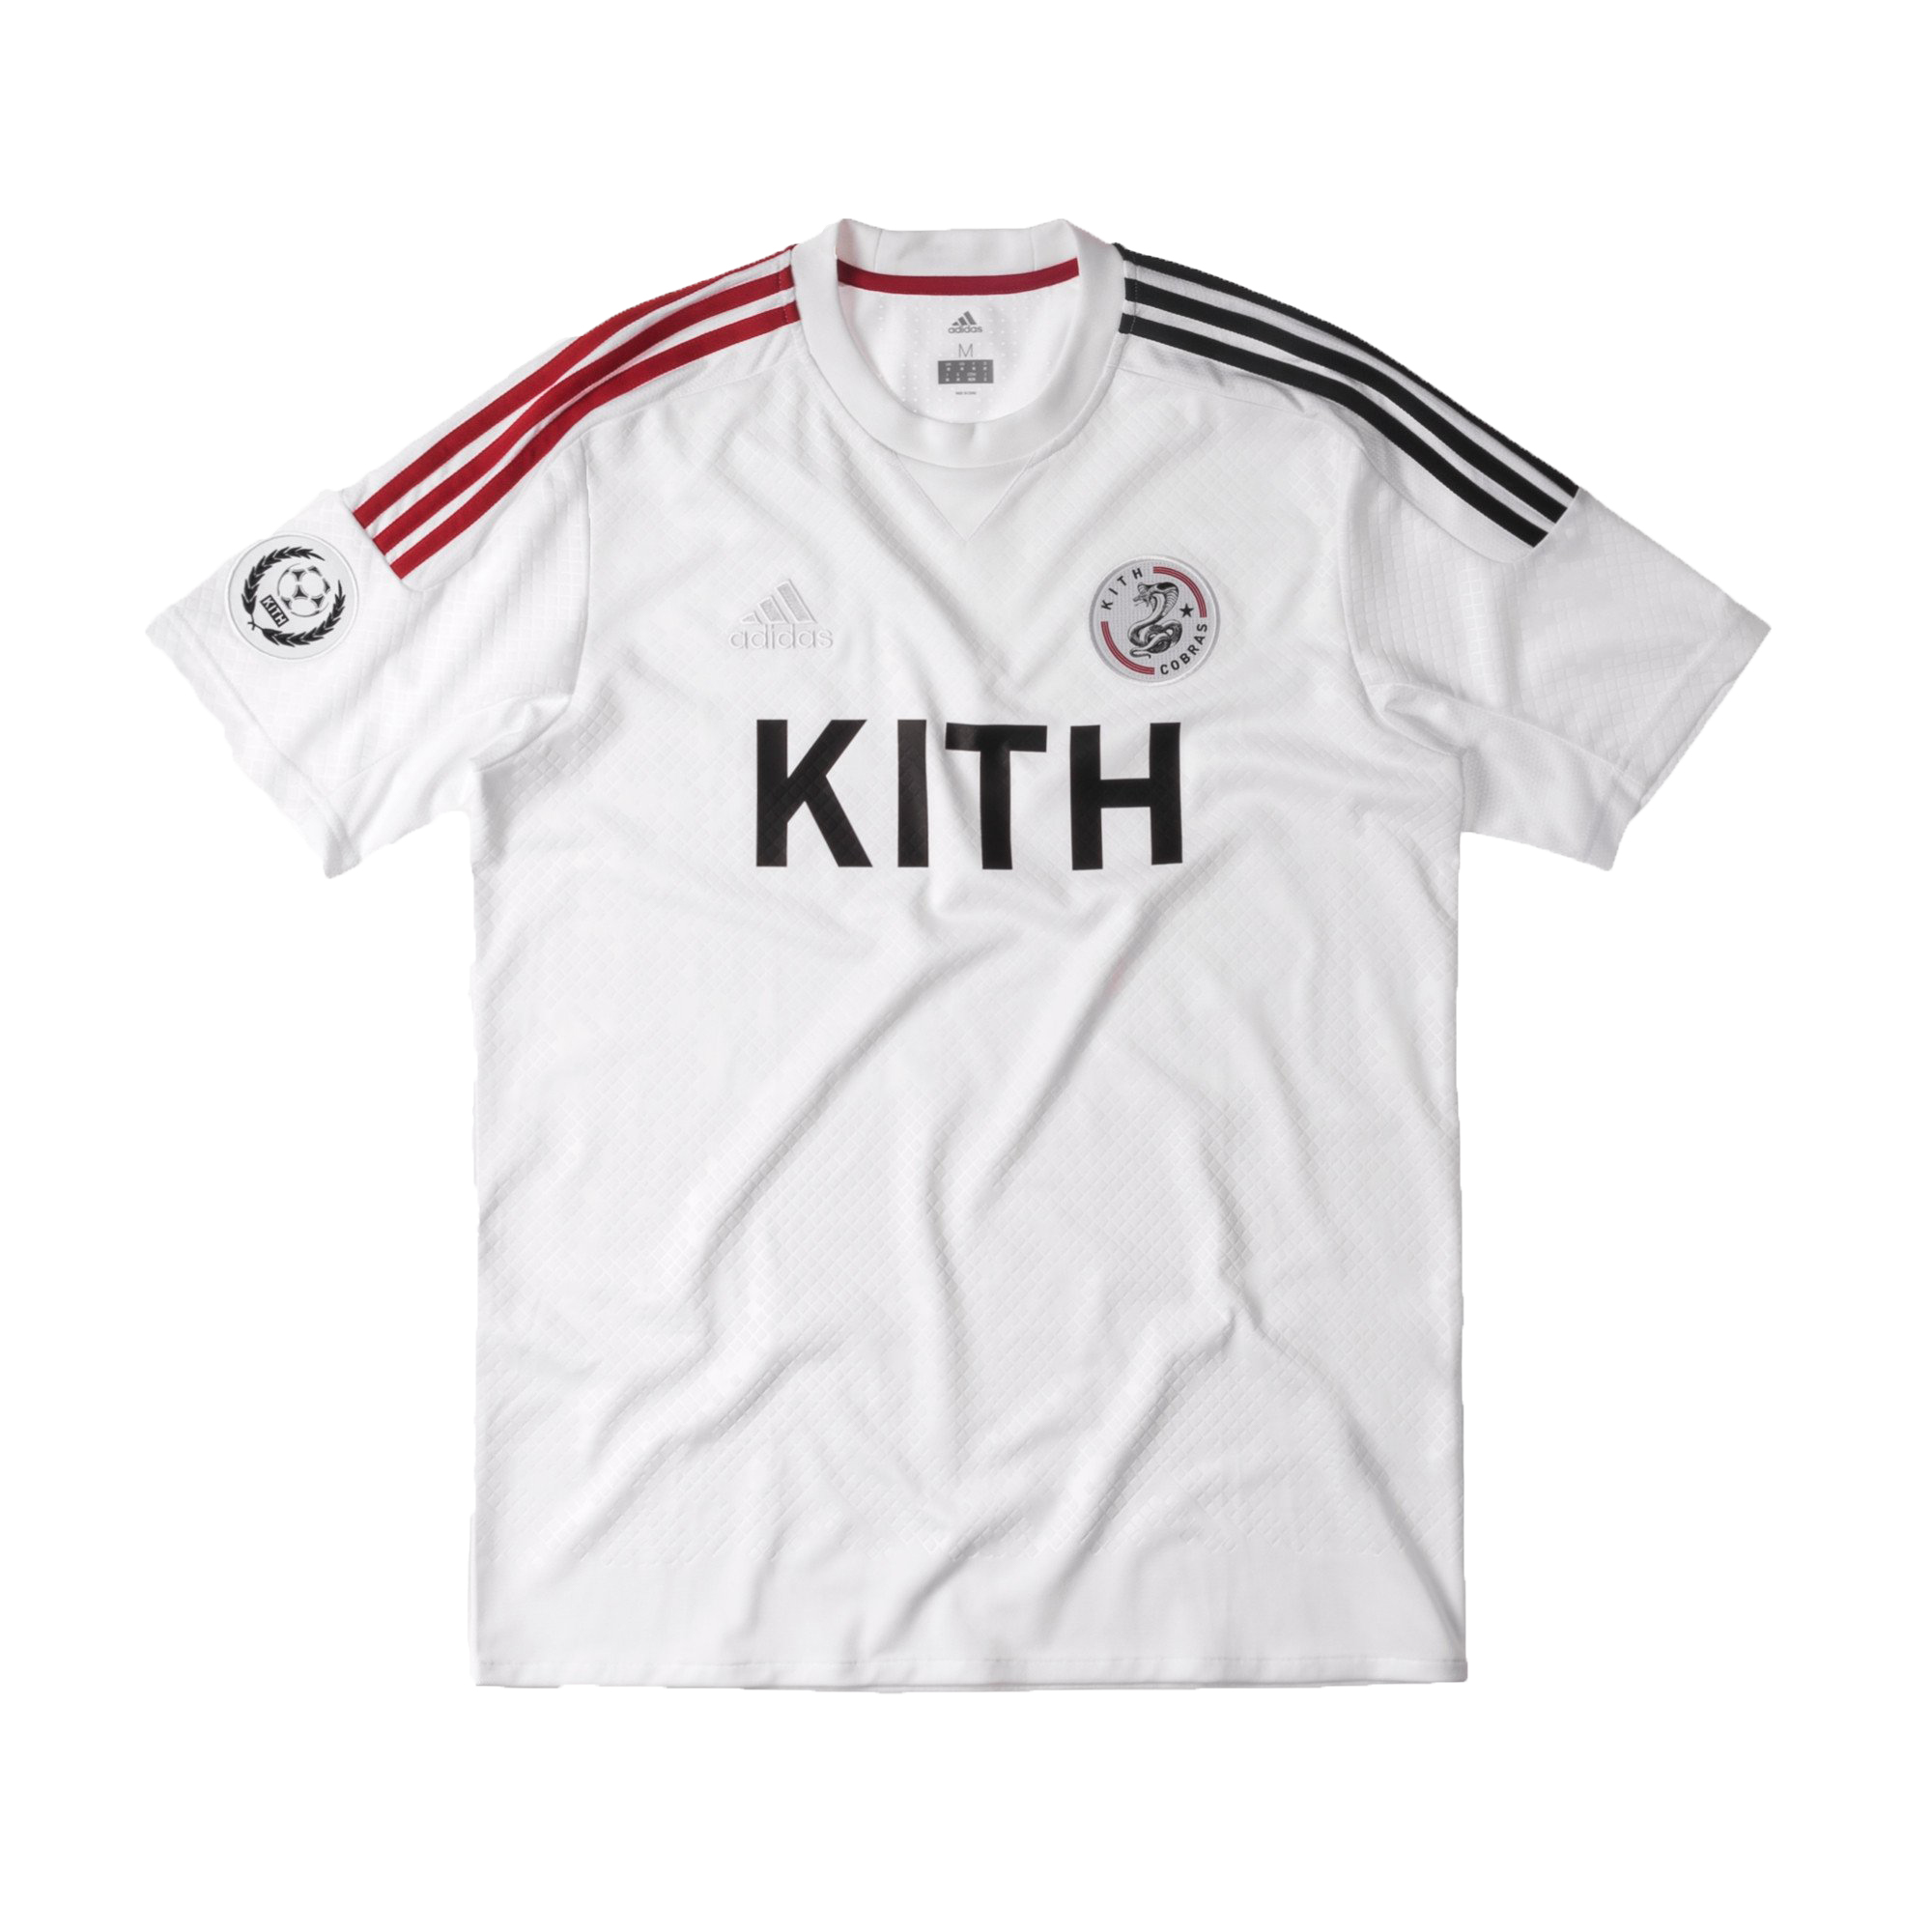 Kith x adidas Soccer Game Jersey  S